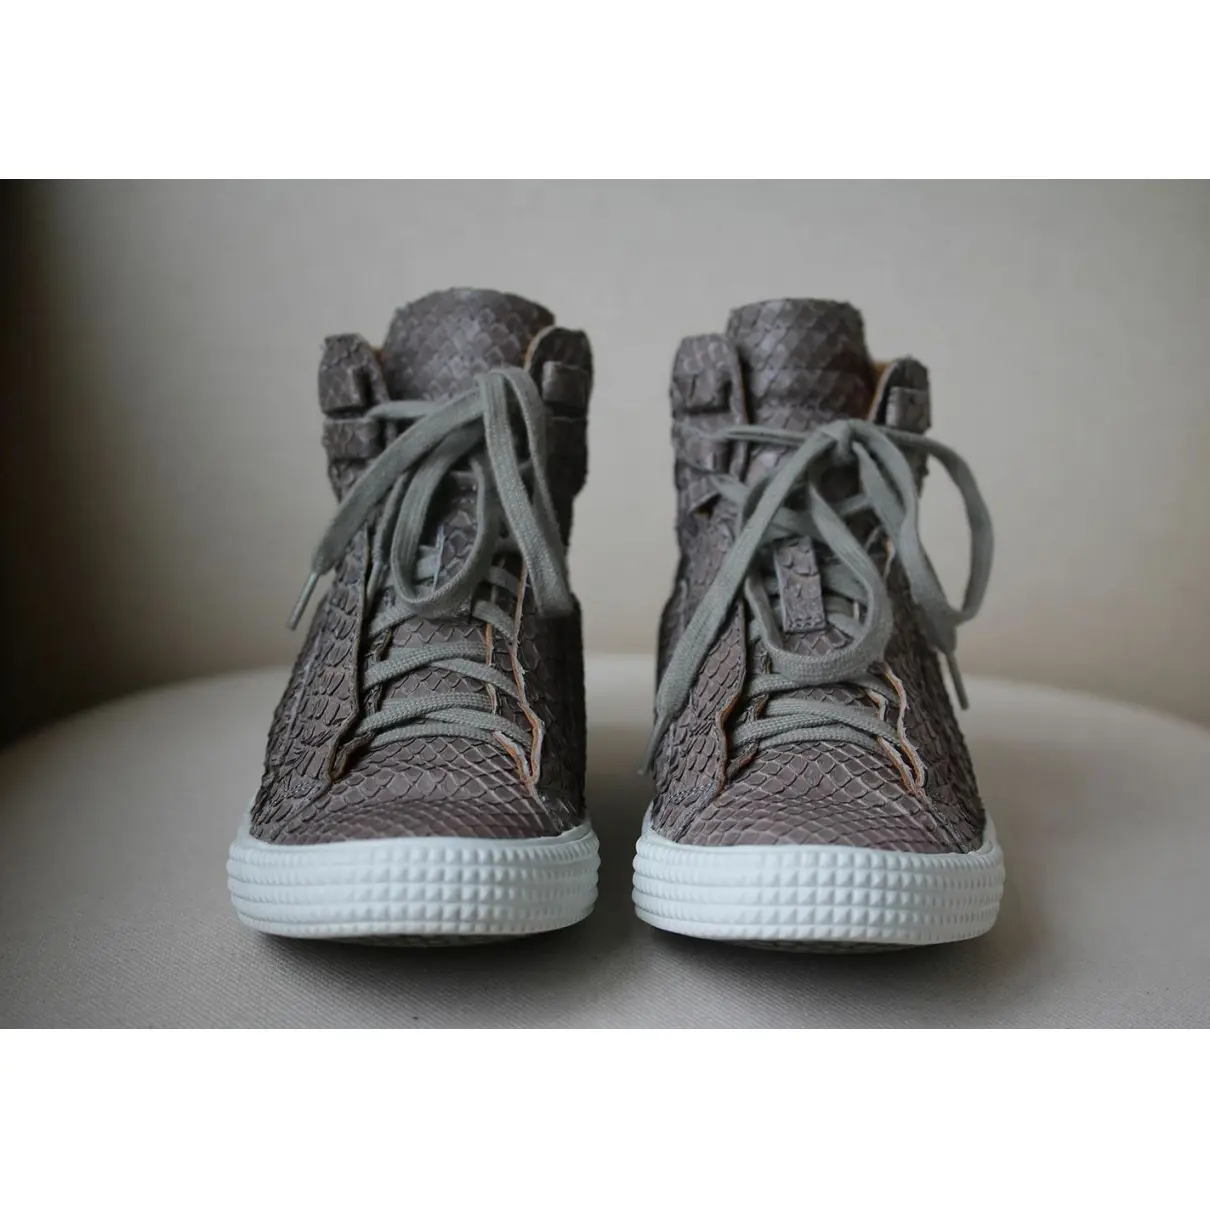 Buy Jimmy Choo Exotic leathers high trainers online